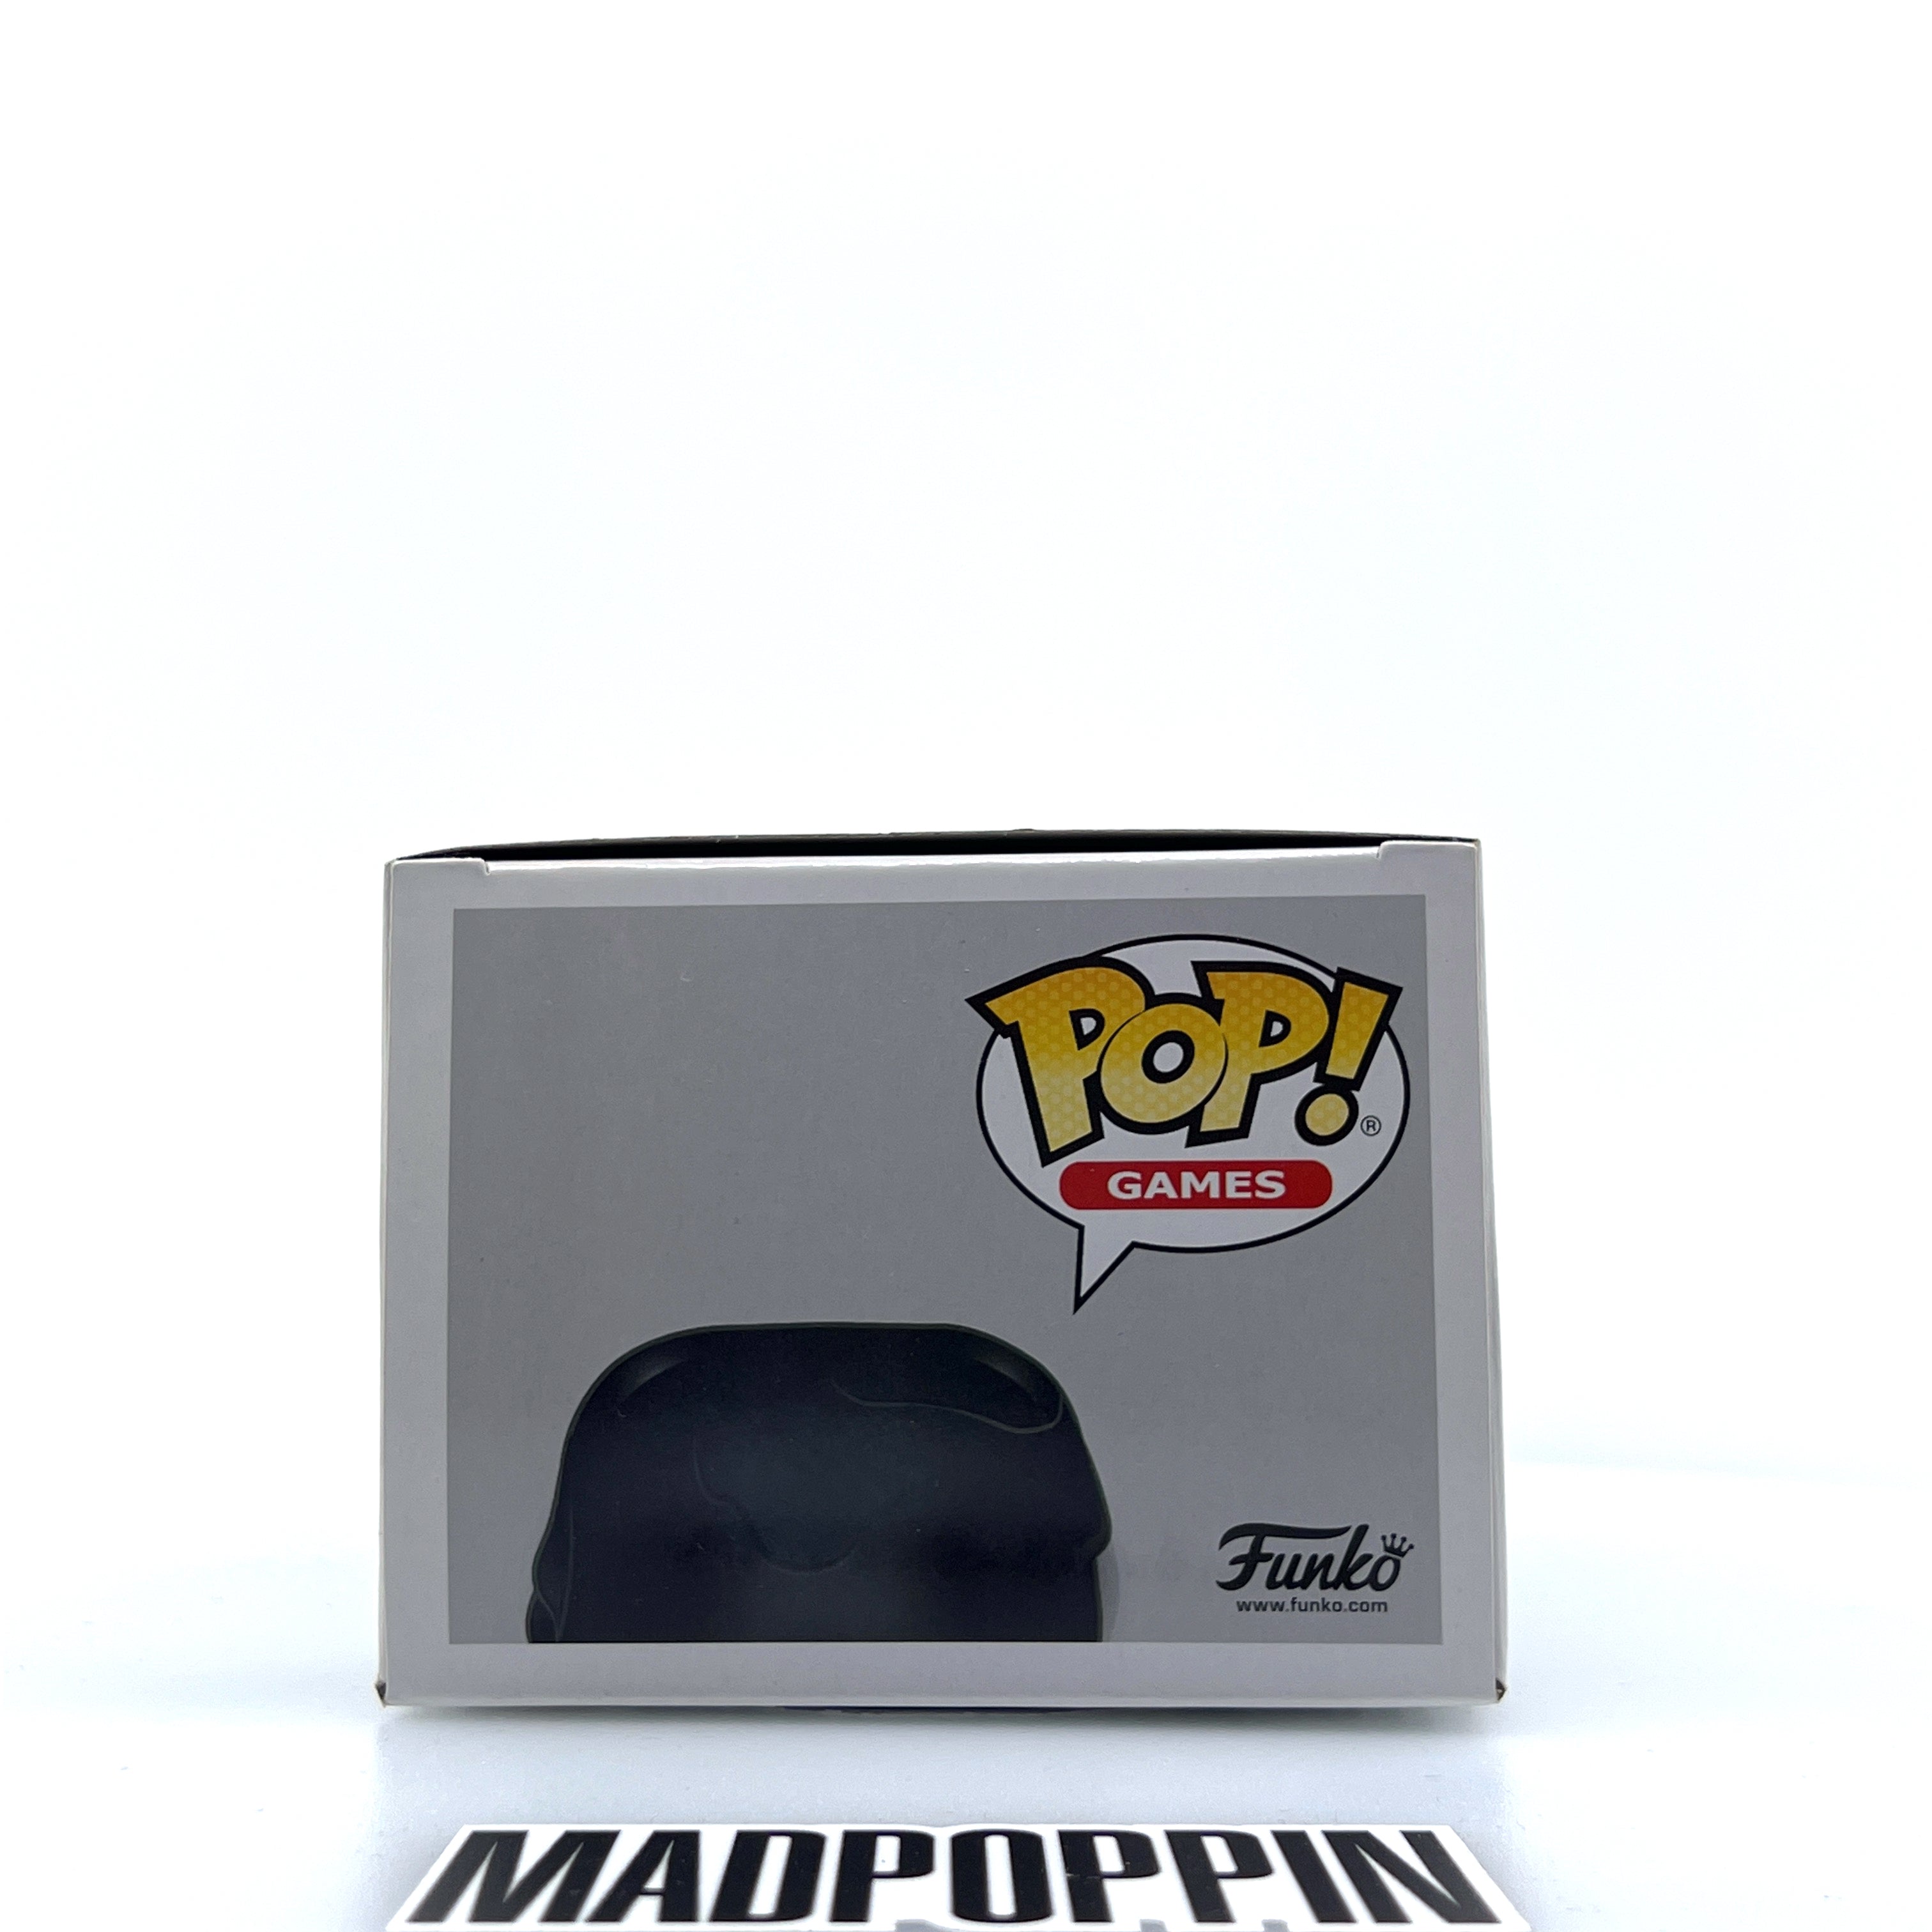 Funko Pop Games Bendy and the Ink Machine Searcher 291